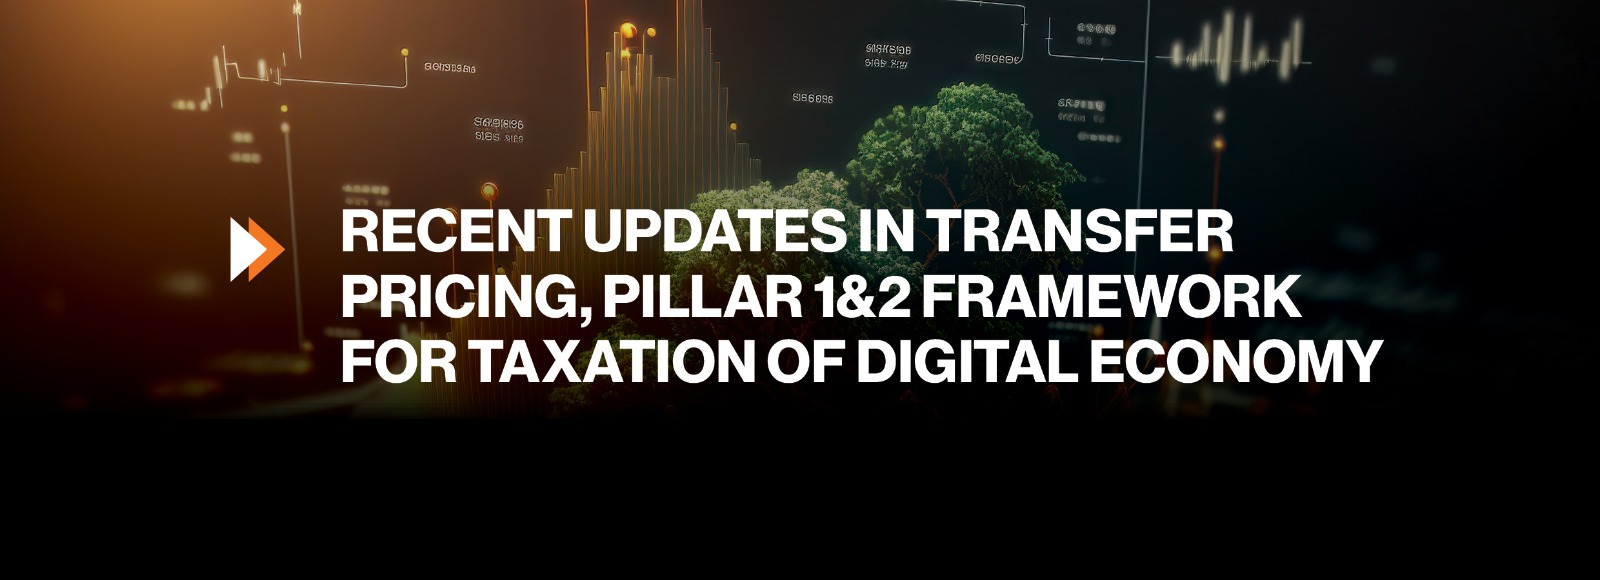 RECENT UPDATES IN TRANSFER PRICING, PILLAR 1&2 FRAMEWORK FOR TAXATION OF DIGITAL ECONOMY